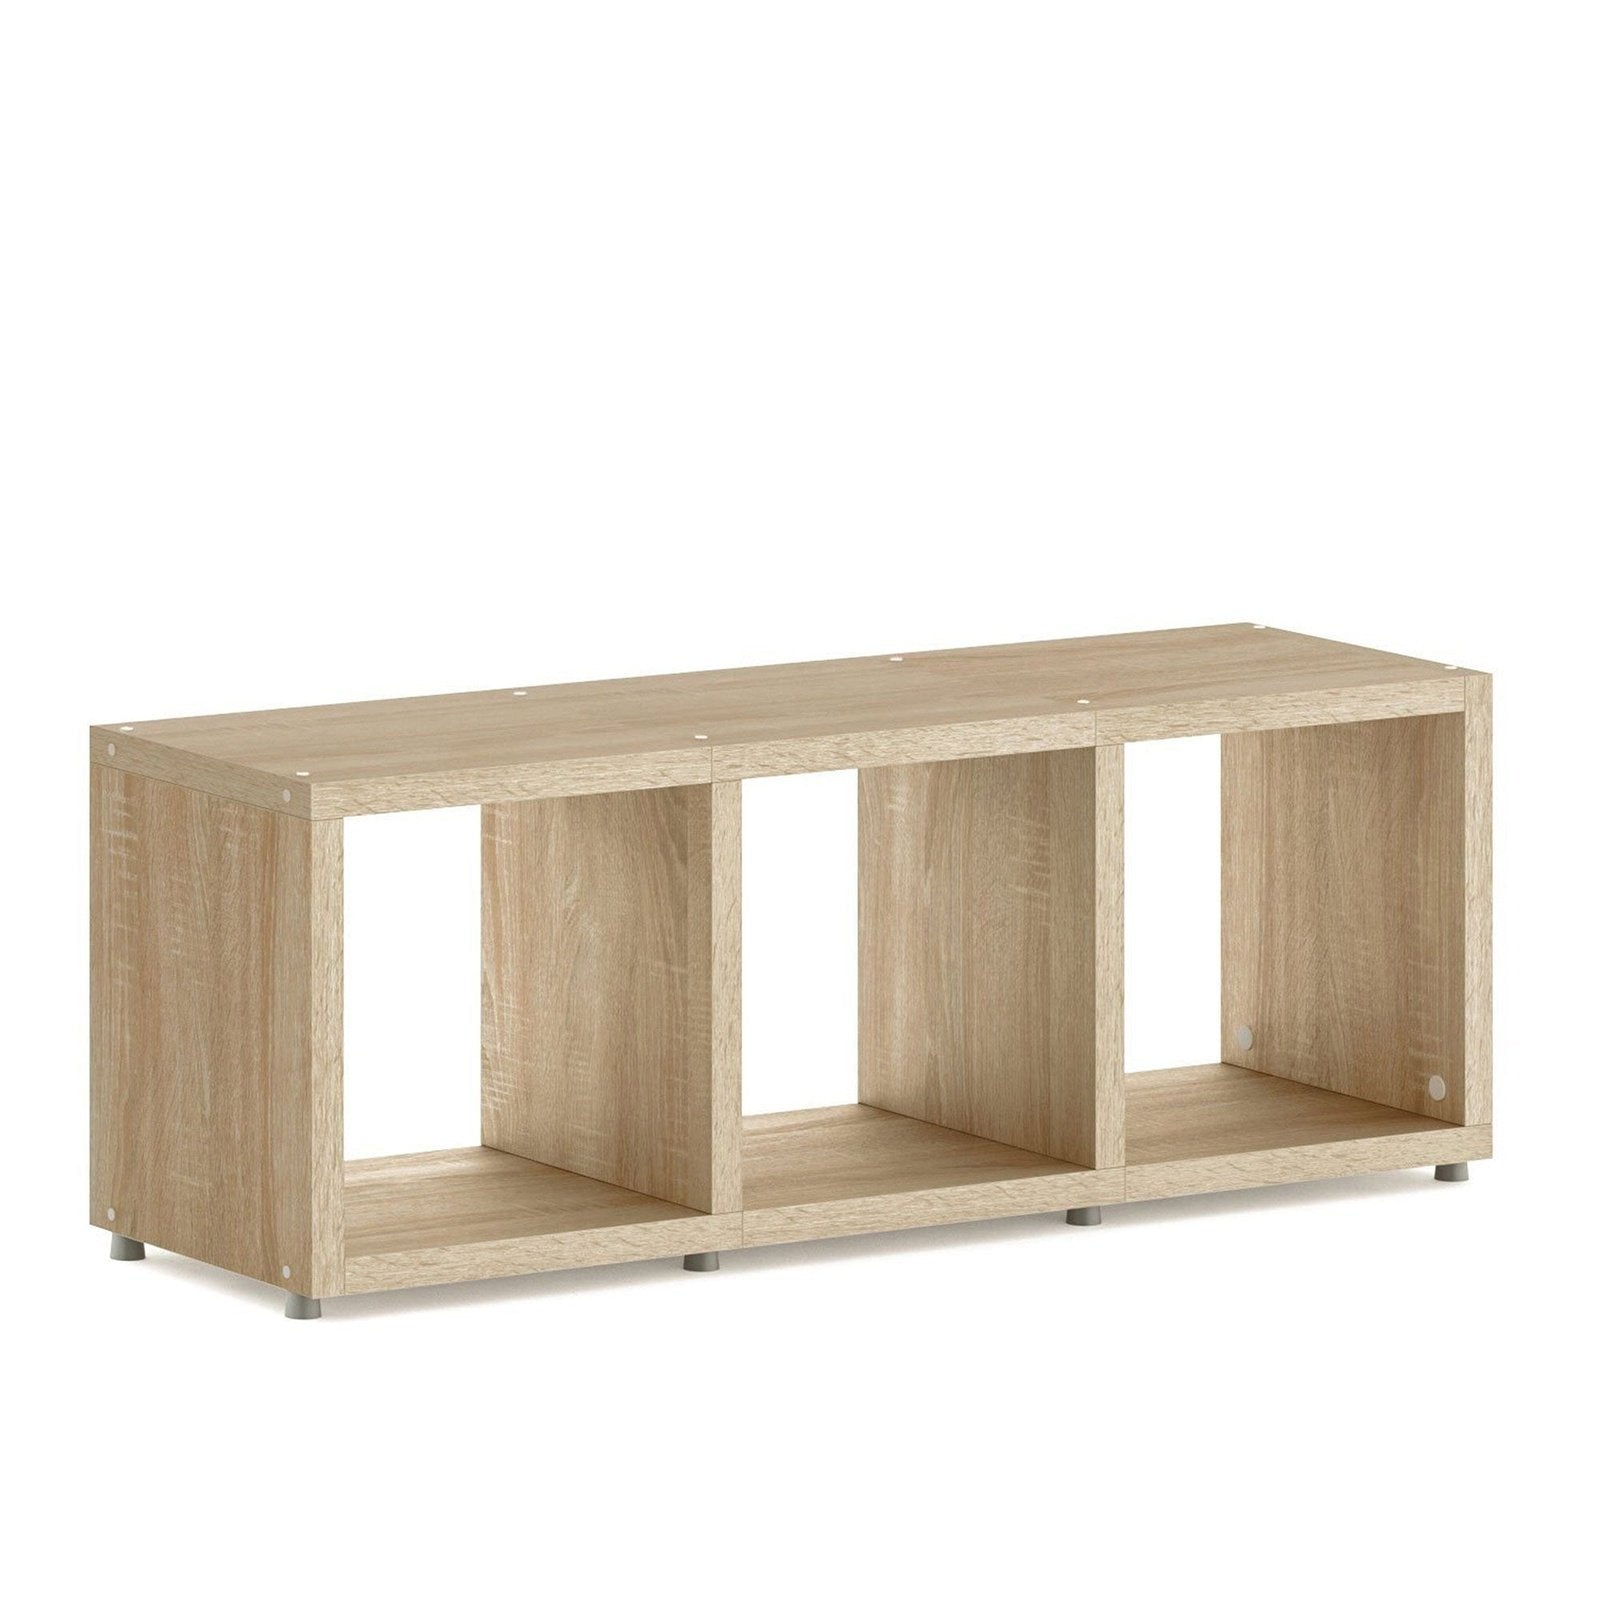 Boon 3x Cube Shelf Storage System - 400x1100x330mm - Office Products Online